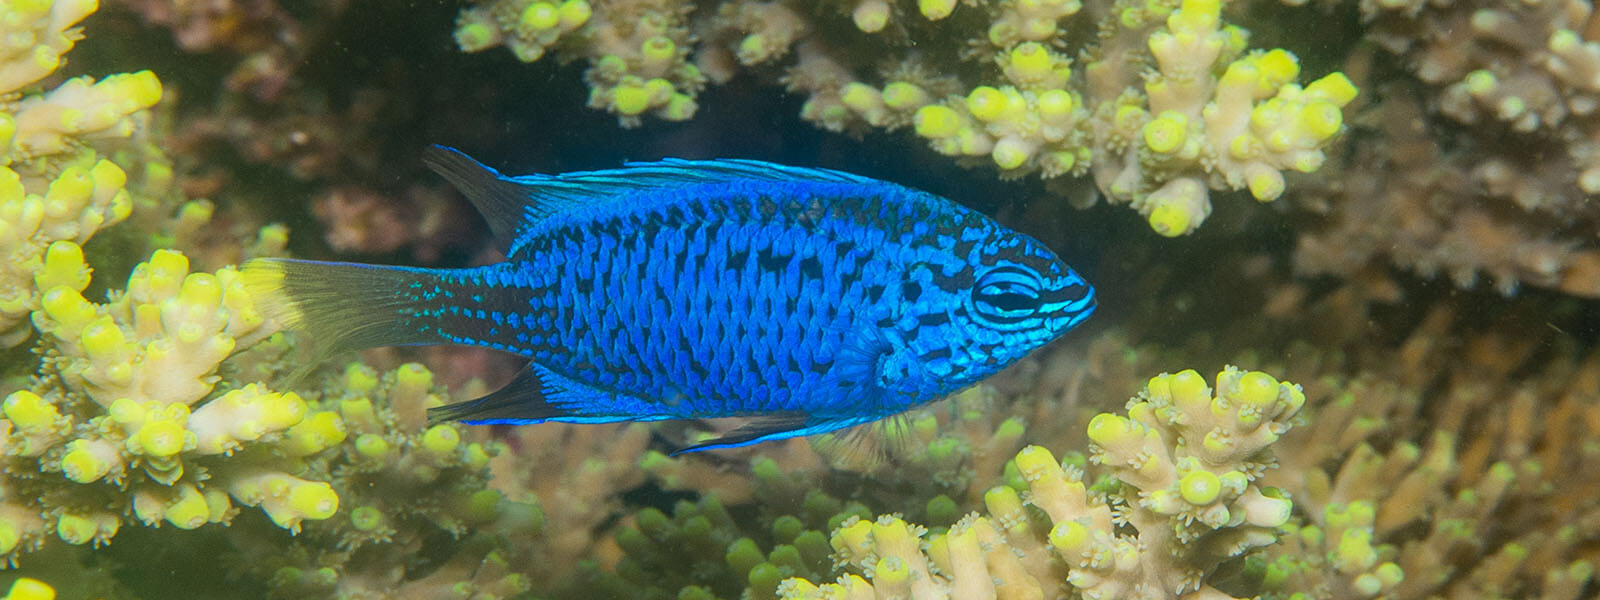 Springer's damselfish is common in the Philippines